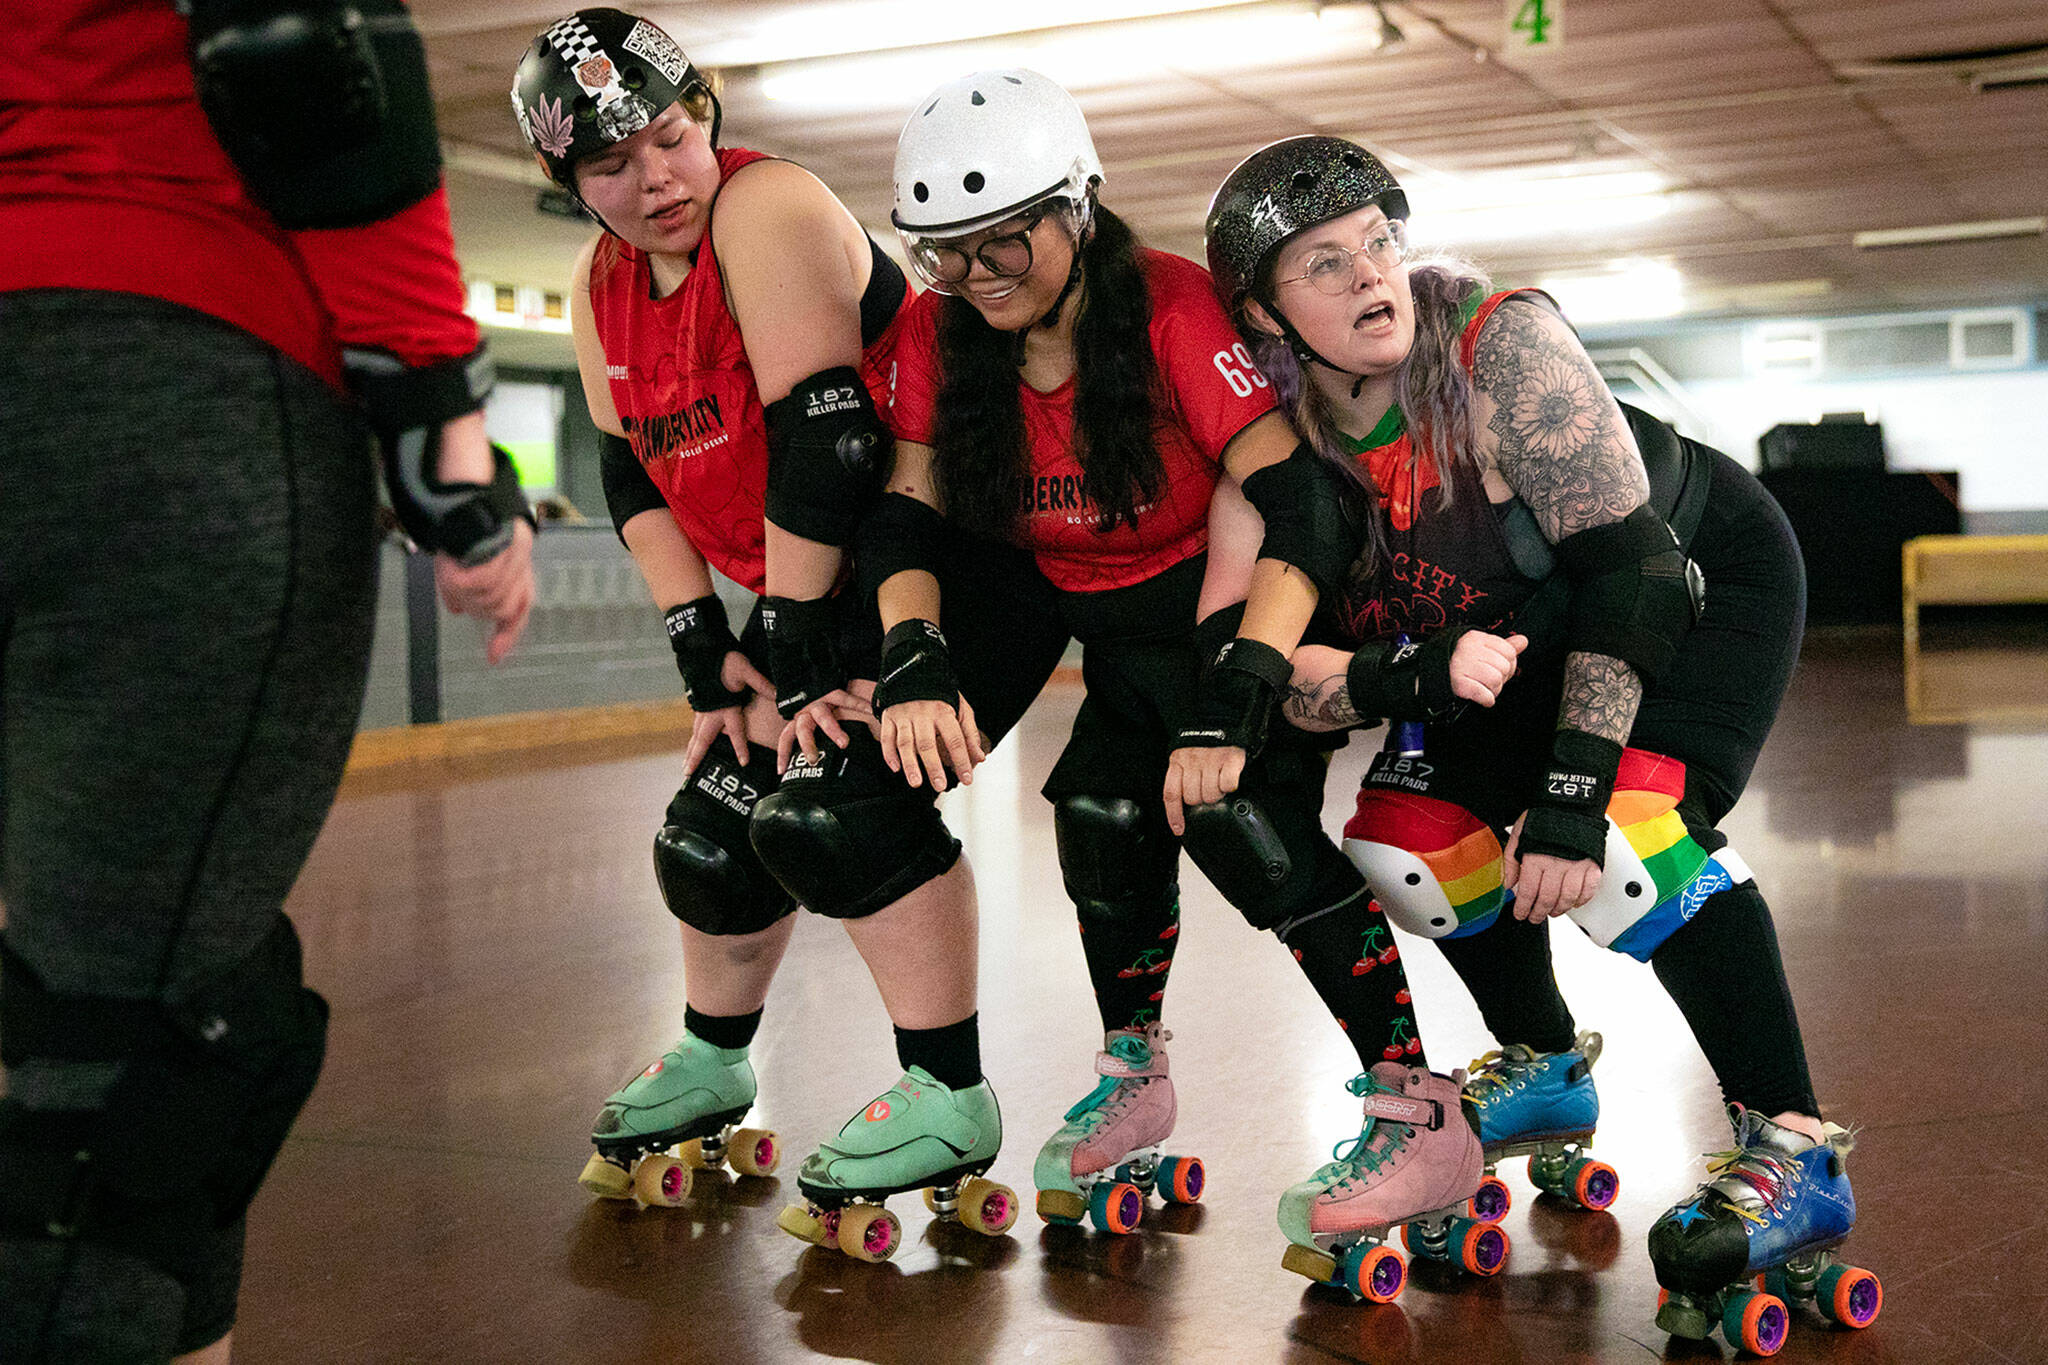 Calling all 'straw-babies': Marysville roller derby outgrows its patch